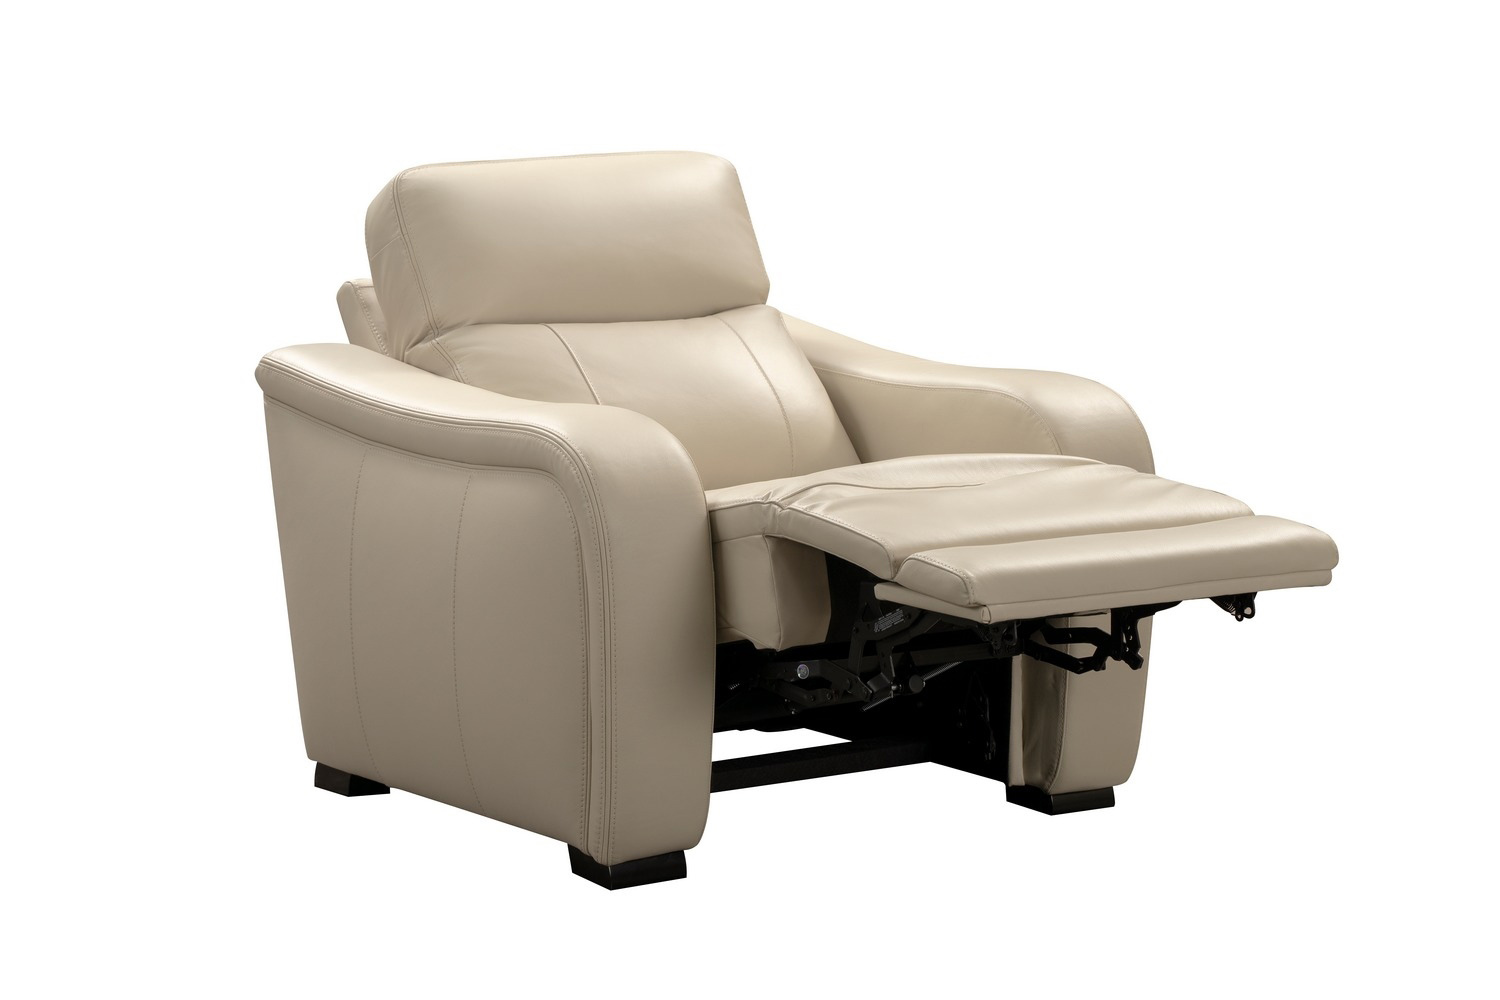 Barcalounger Electra Power Recliner Chair with Power Head Rest and Power Lumbar - Laurel Cream/Leather Match